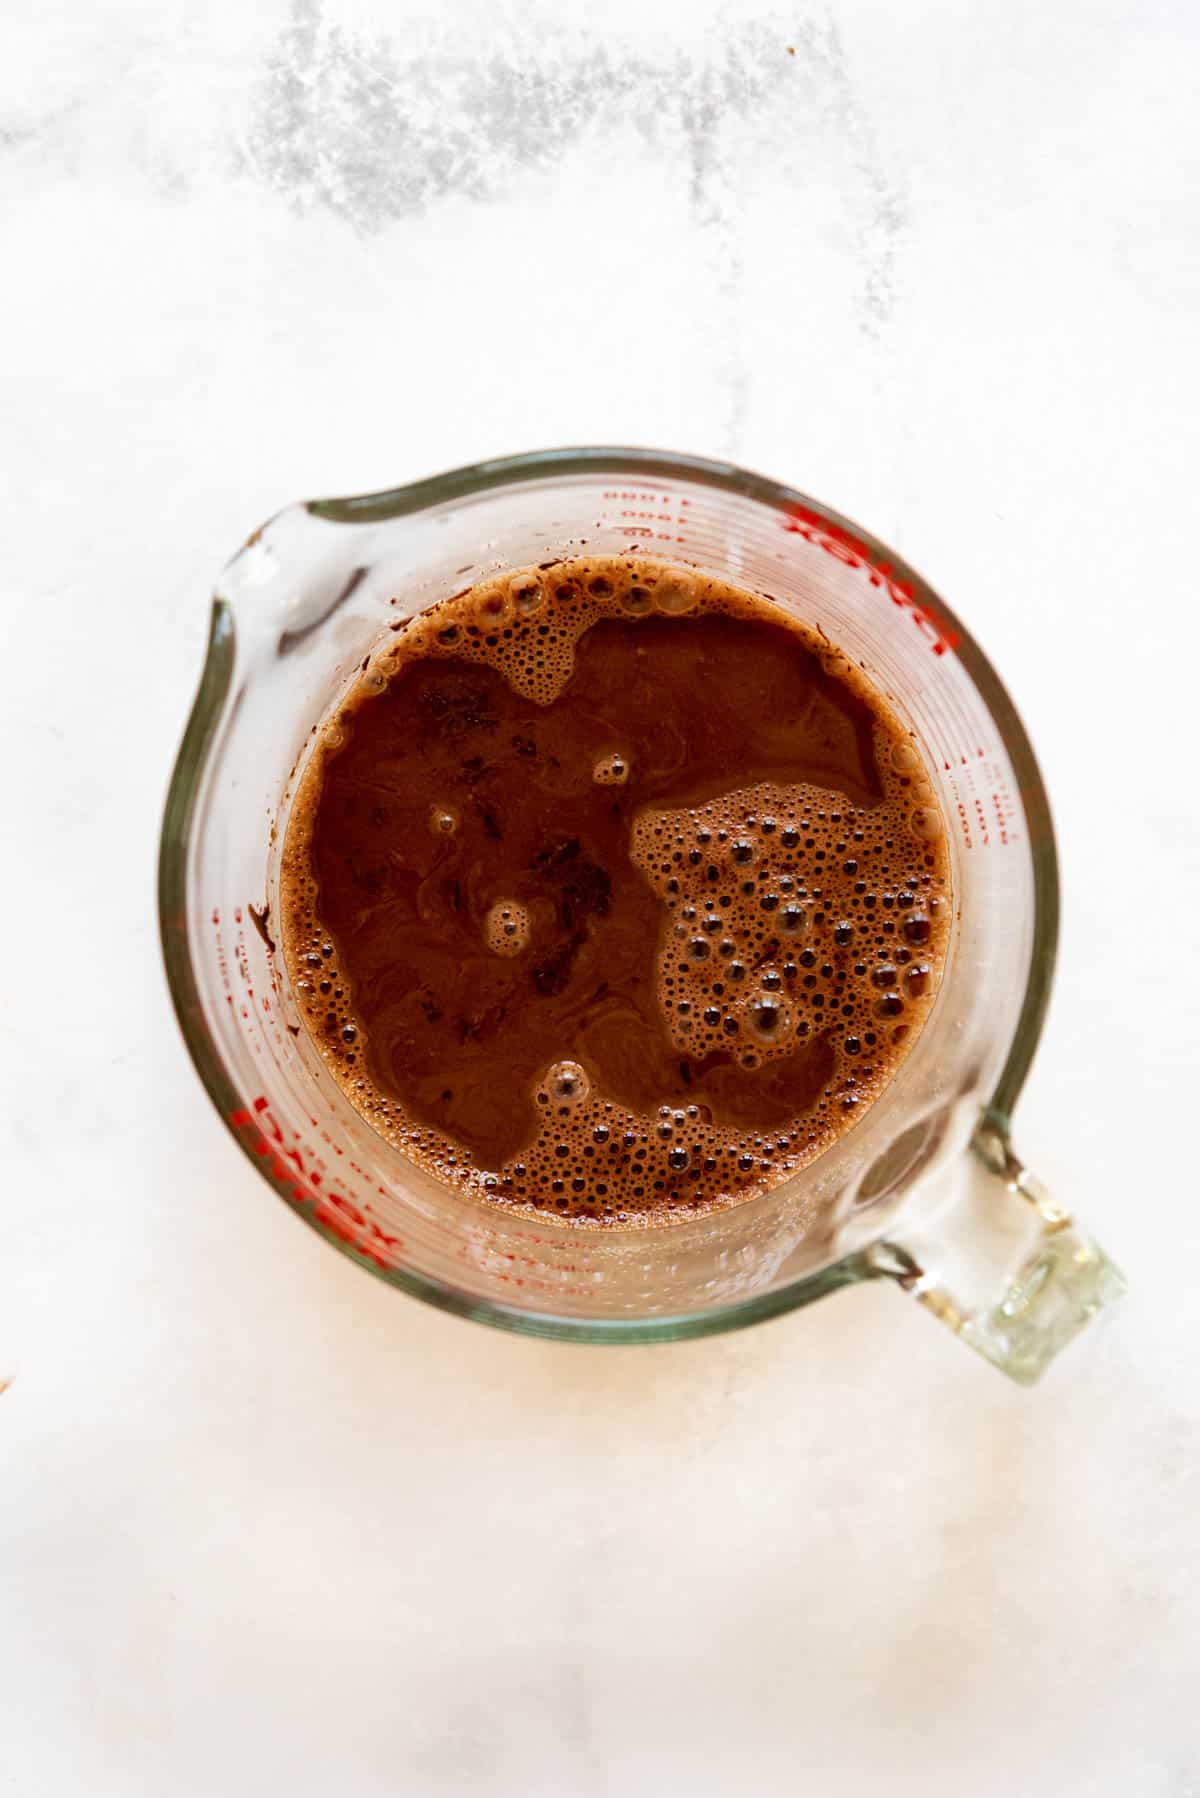 Top view of a glass measuring jug with a cocoa powder mixture in it.